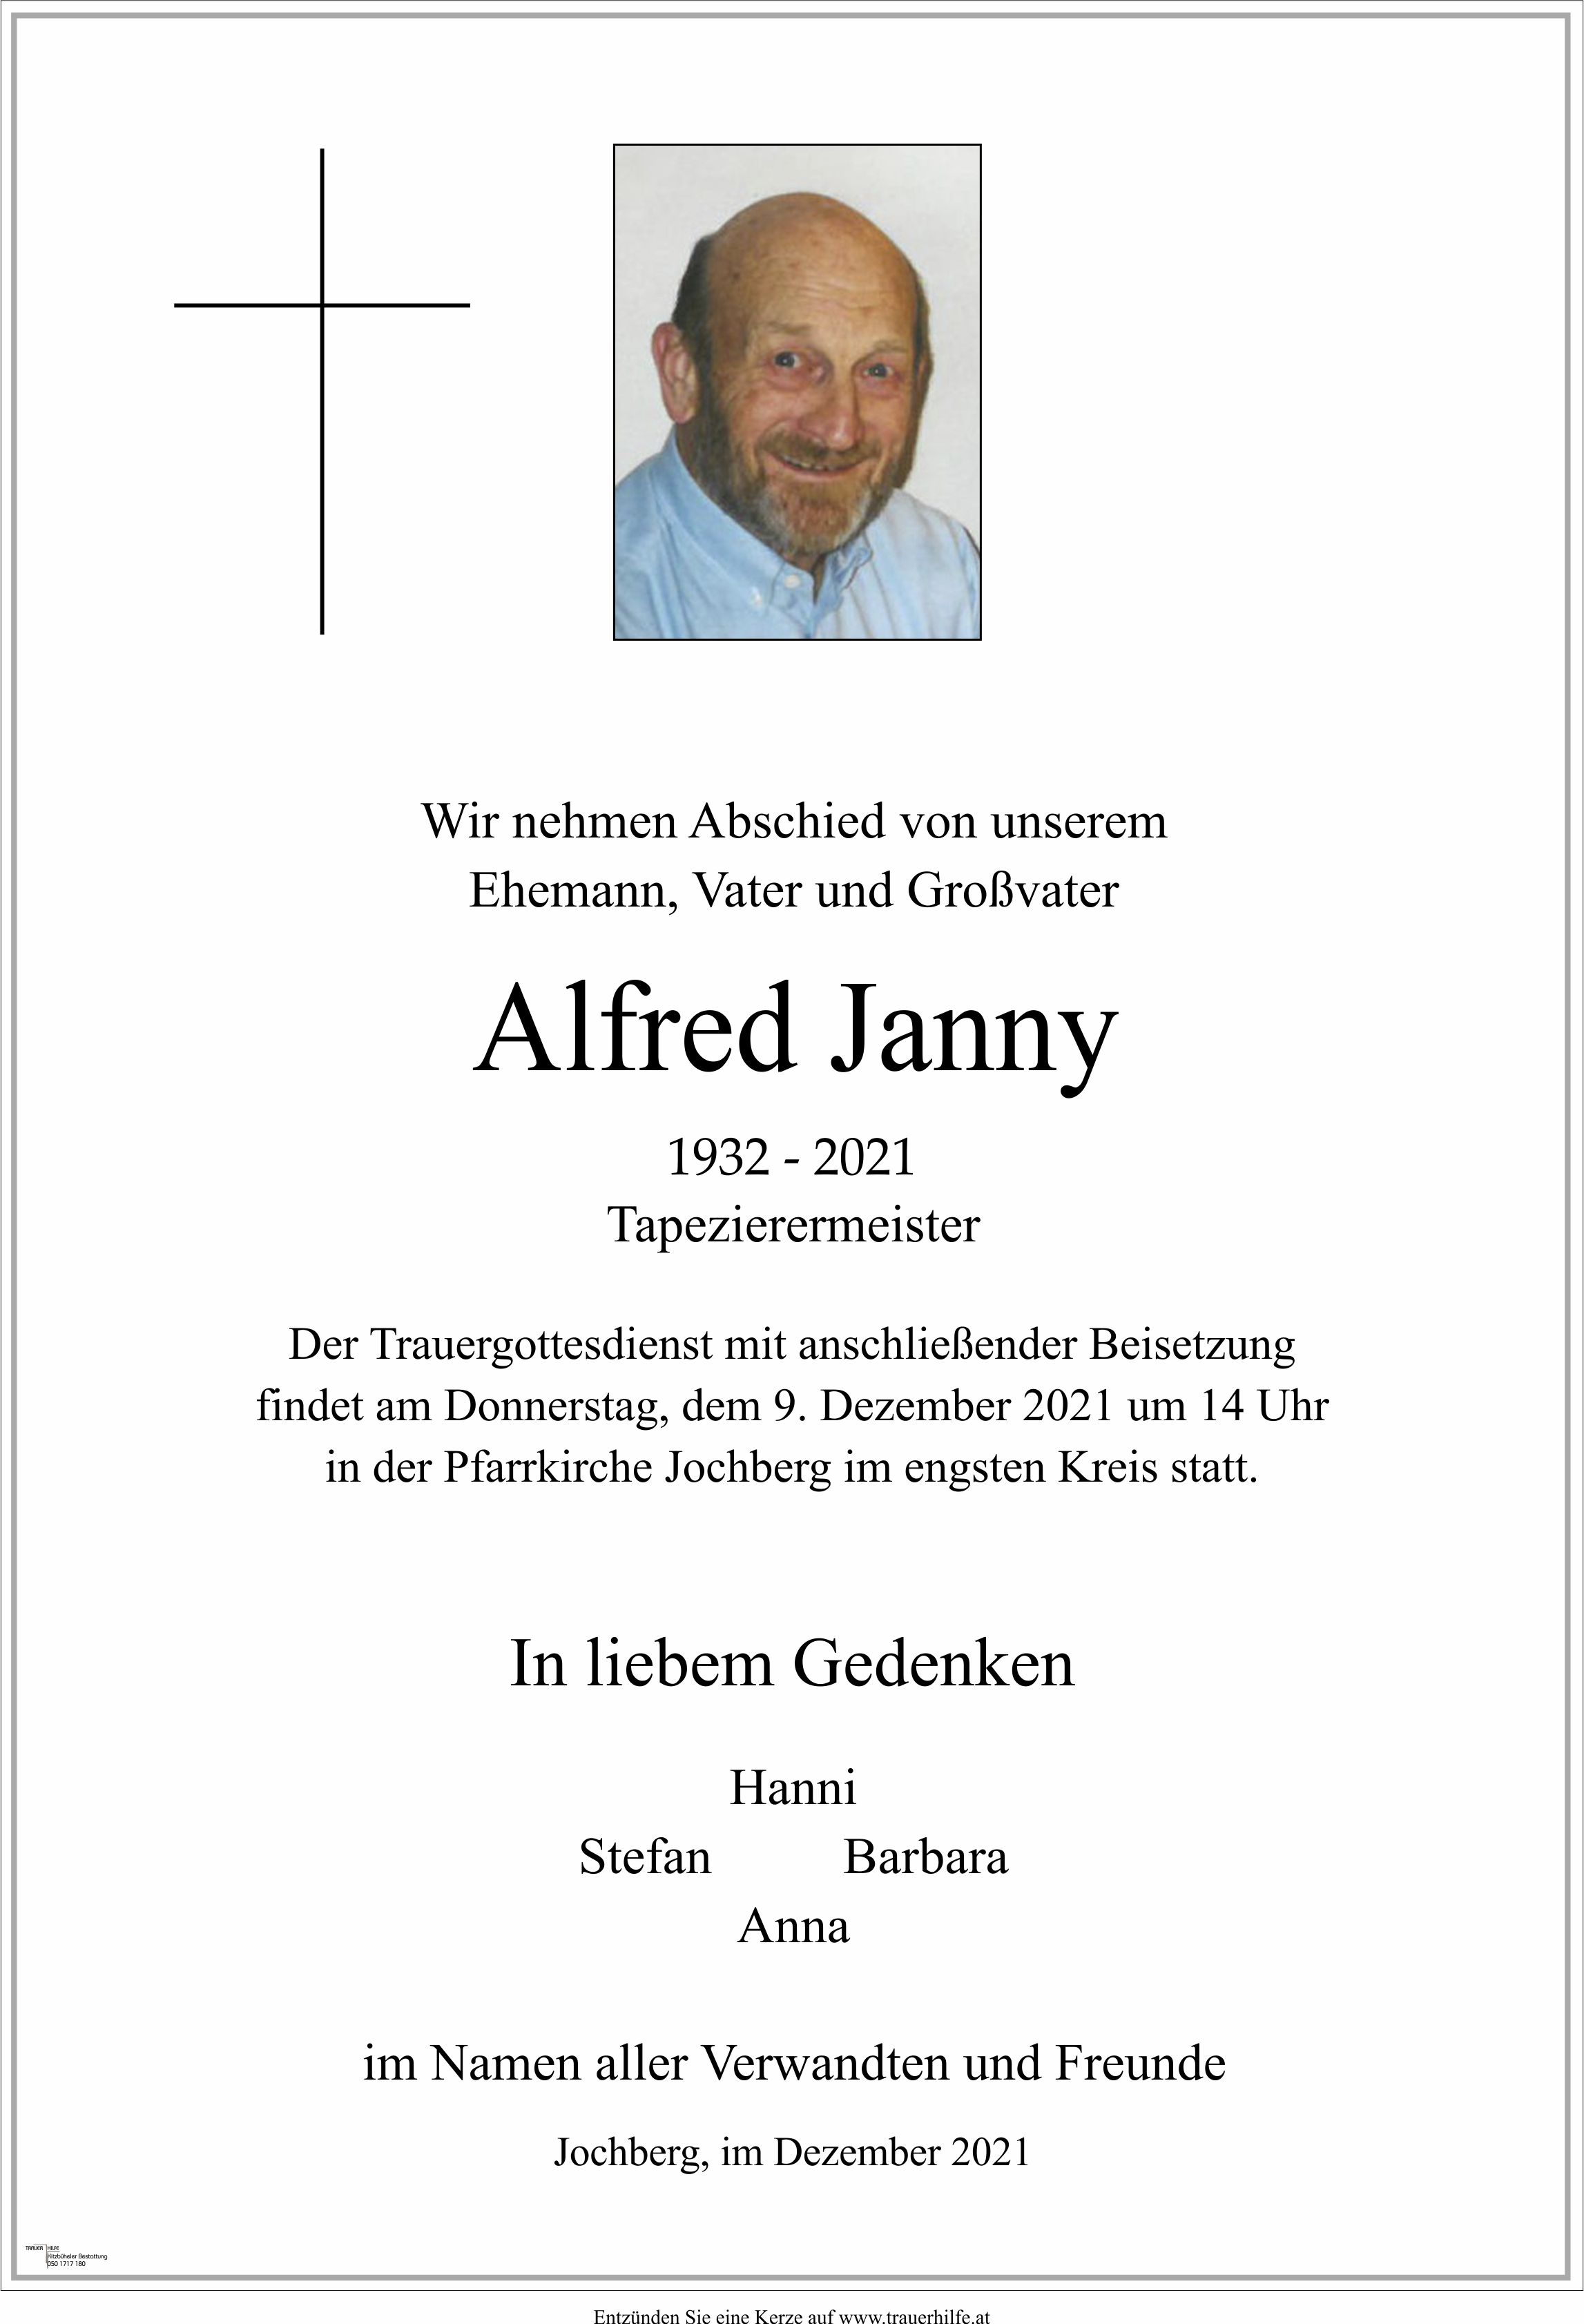 Alfred Janny